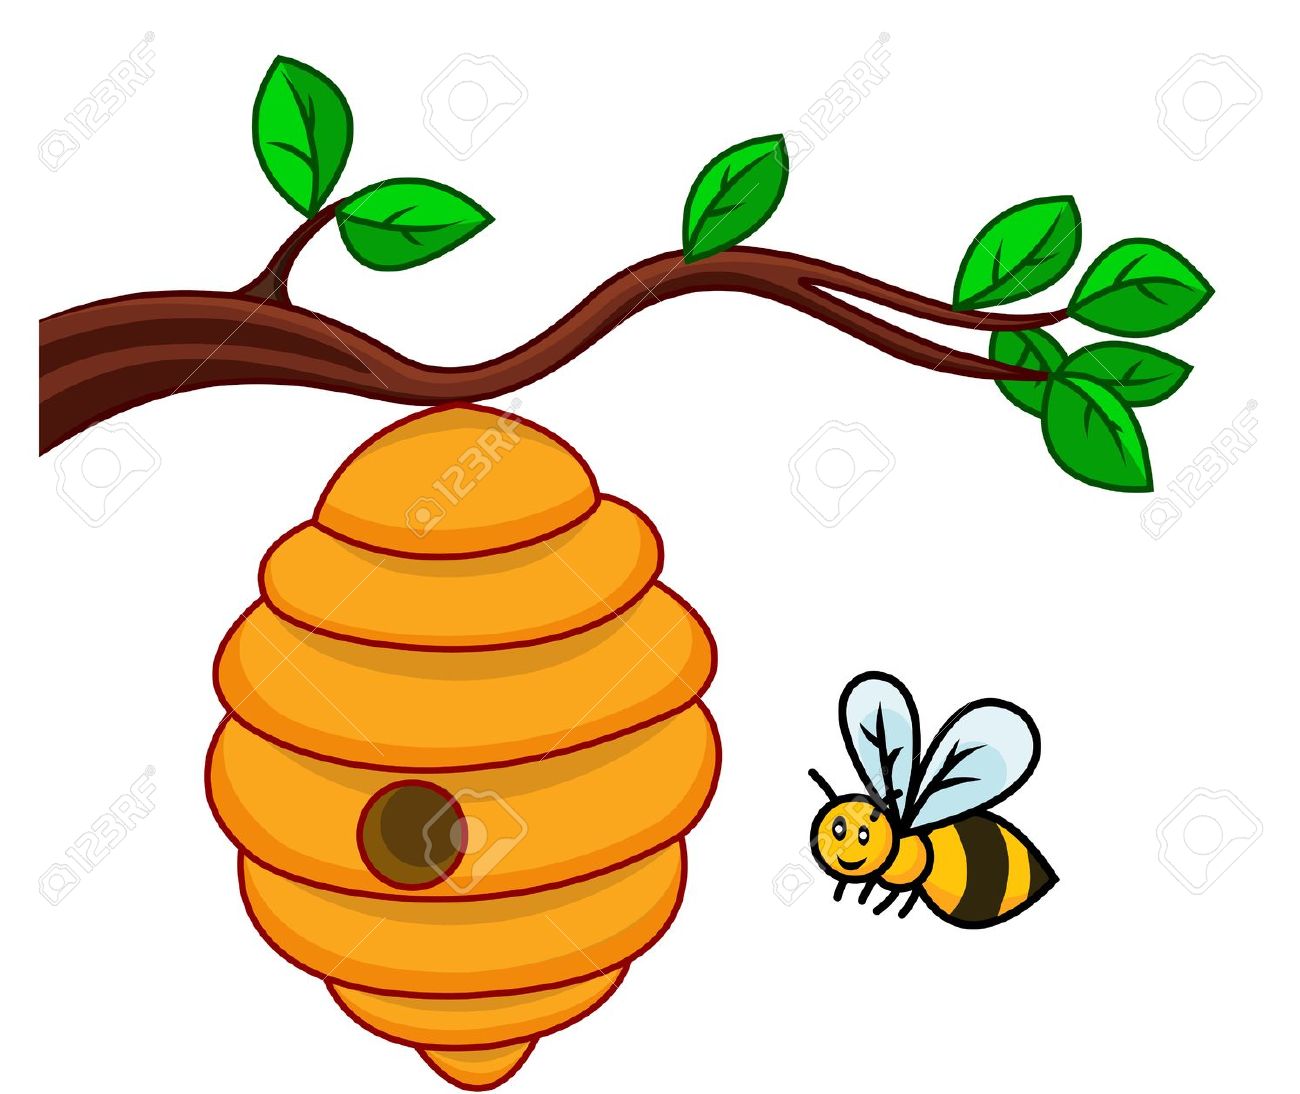 beehive: illustration of . - Beehive Clipart